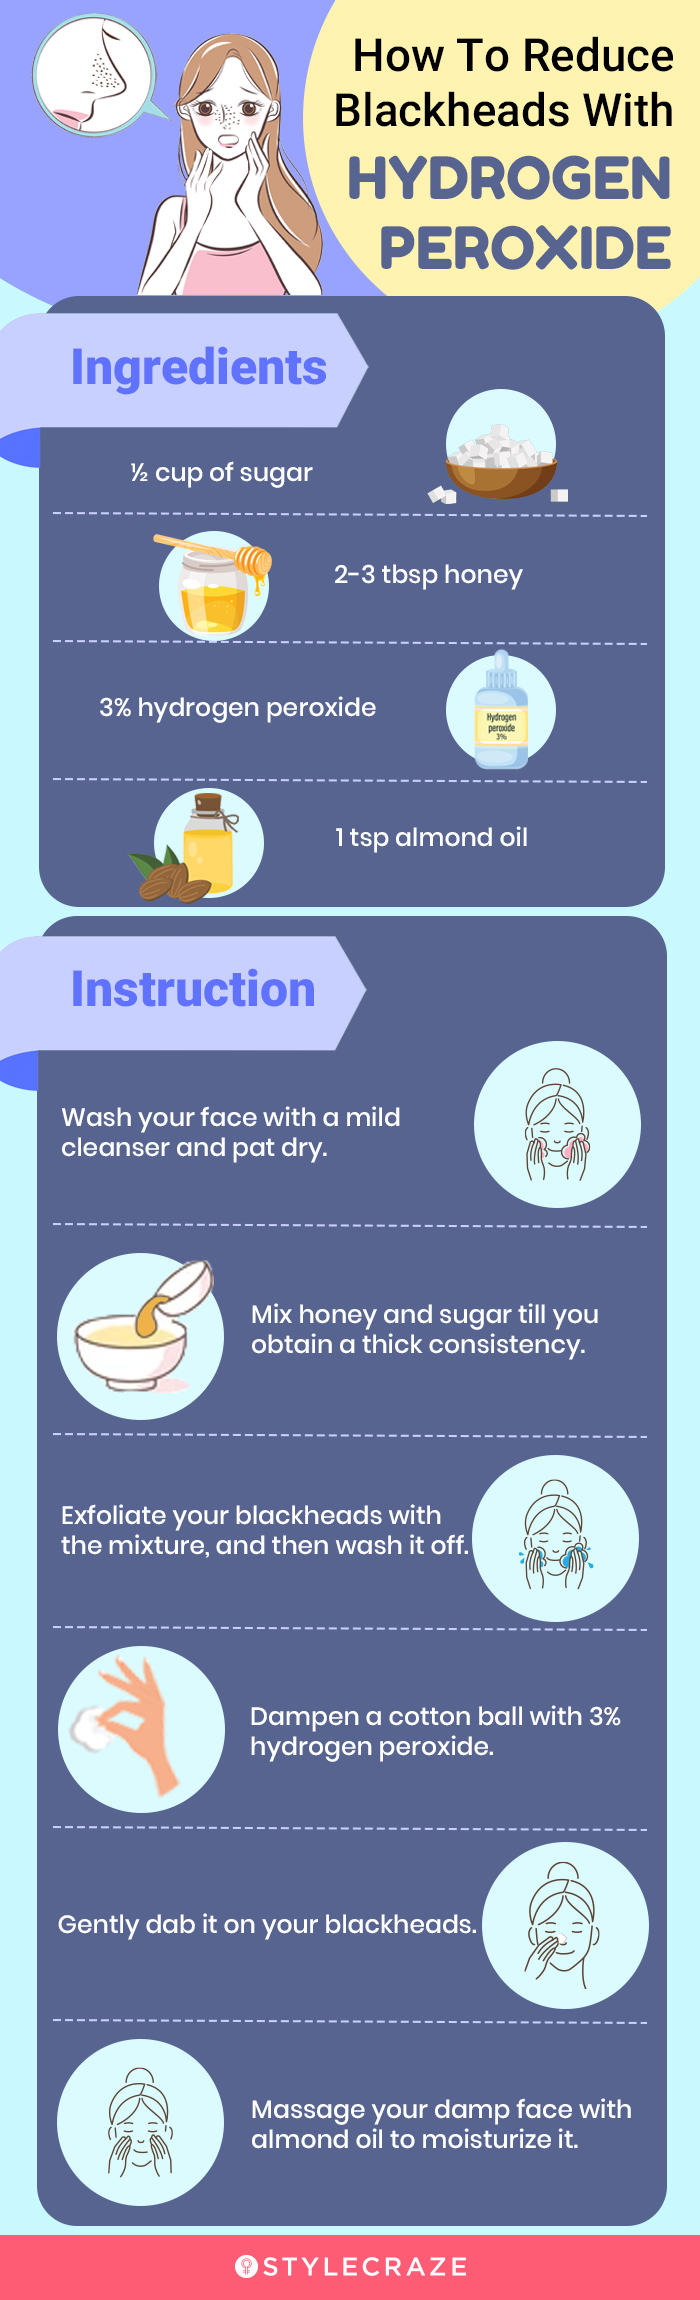 how to reduce blackheads with hydrogen peroxide (infographic)